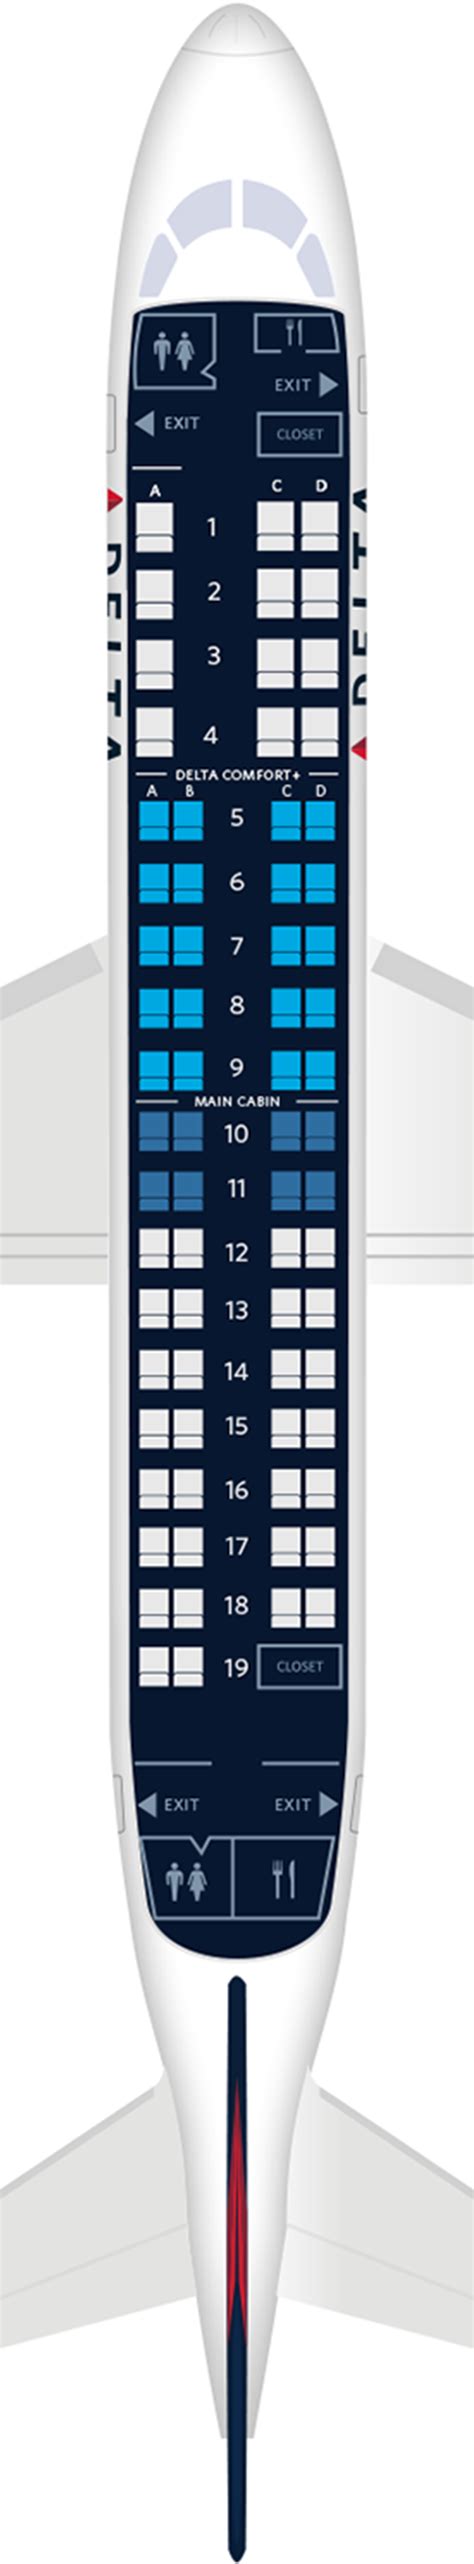 Embraer 175 . Embraer 190 . Embraer 195-E2 . About the Embraer 195-E2 . Seat map . Specifications . ... Seat map. Would you like a bird’s-eye view of our Embraer 195-E2? With our interactive seat map, you can scroll through the airplane and have a look at our seat layout. Find your ideal seat on our Embraer aircraft for the best start to your .... 